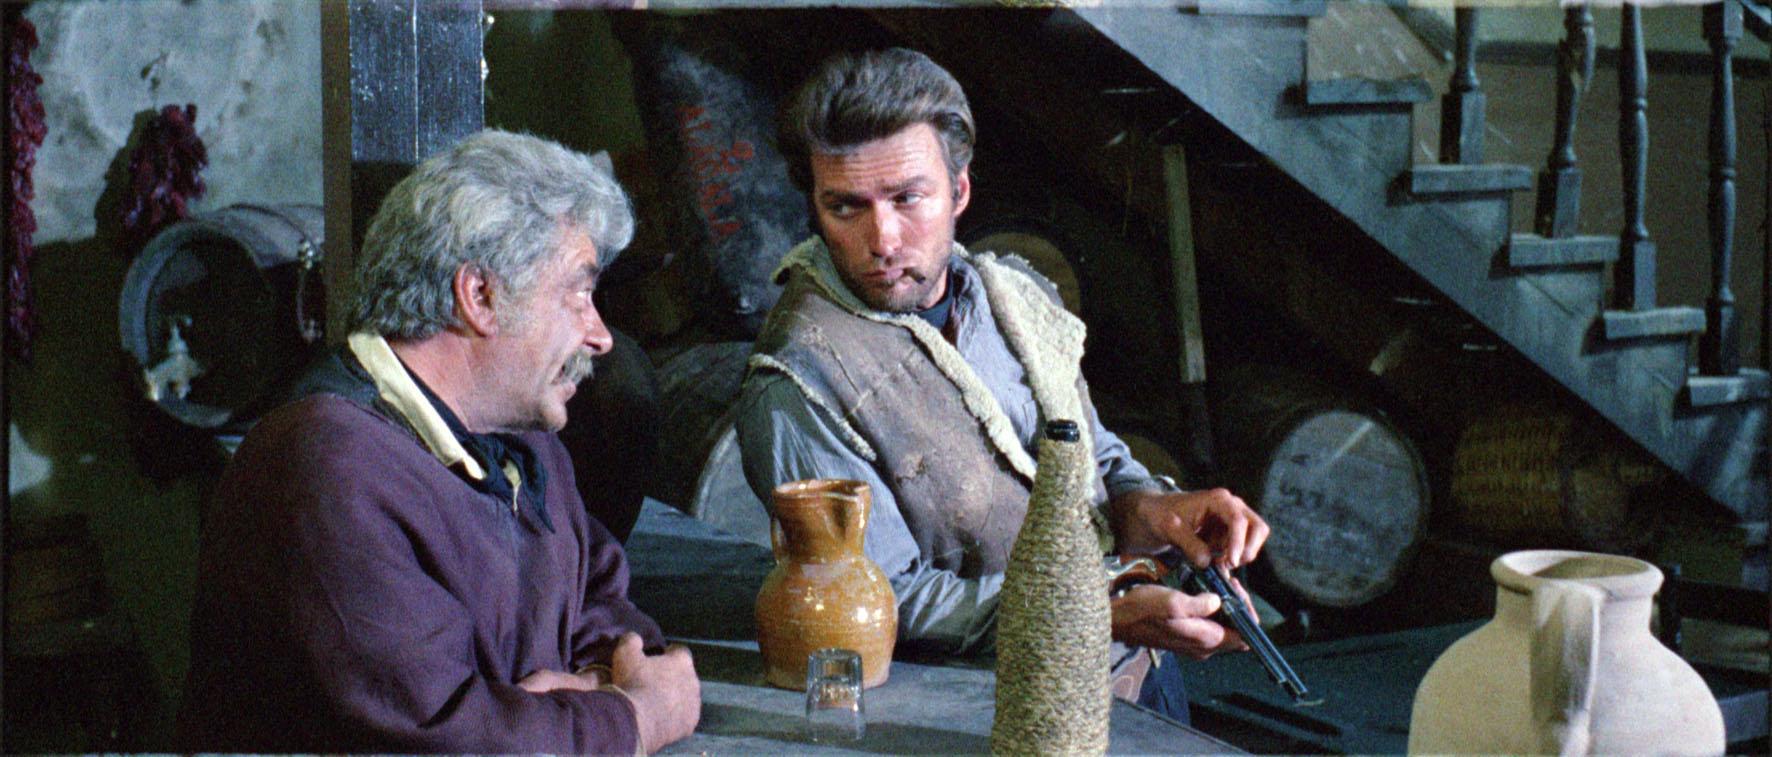 Clint Eastwood and José Calvo in A Fistful of Dollars (1964)